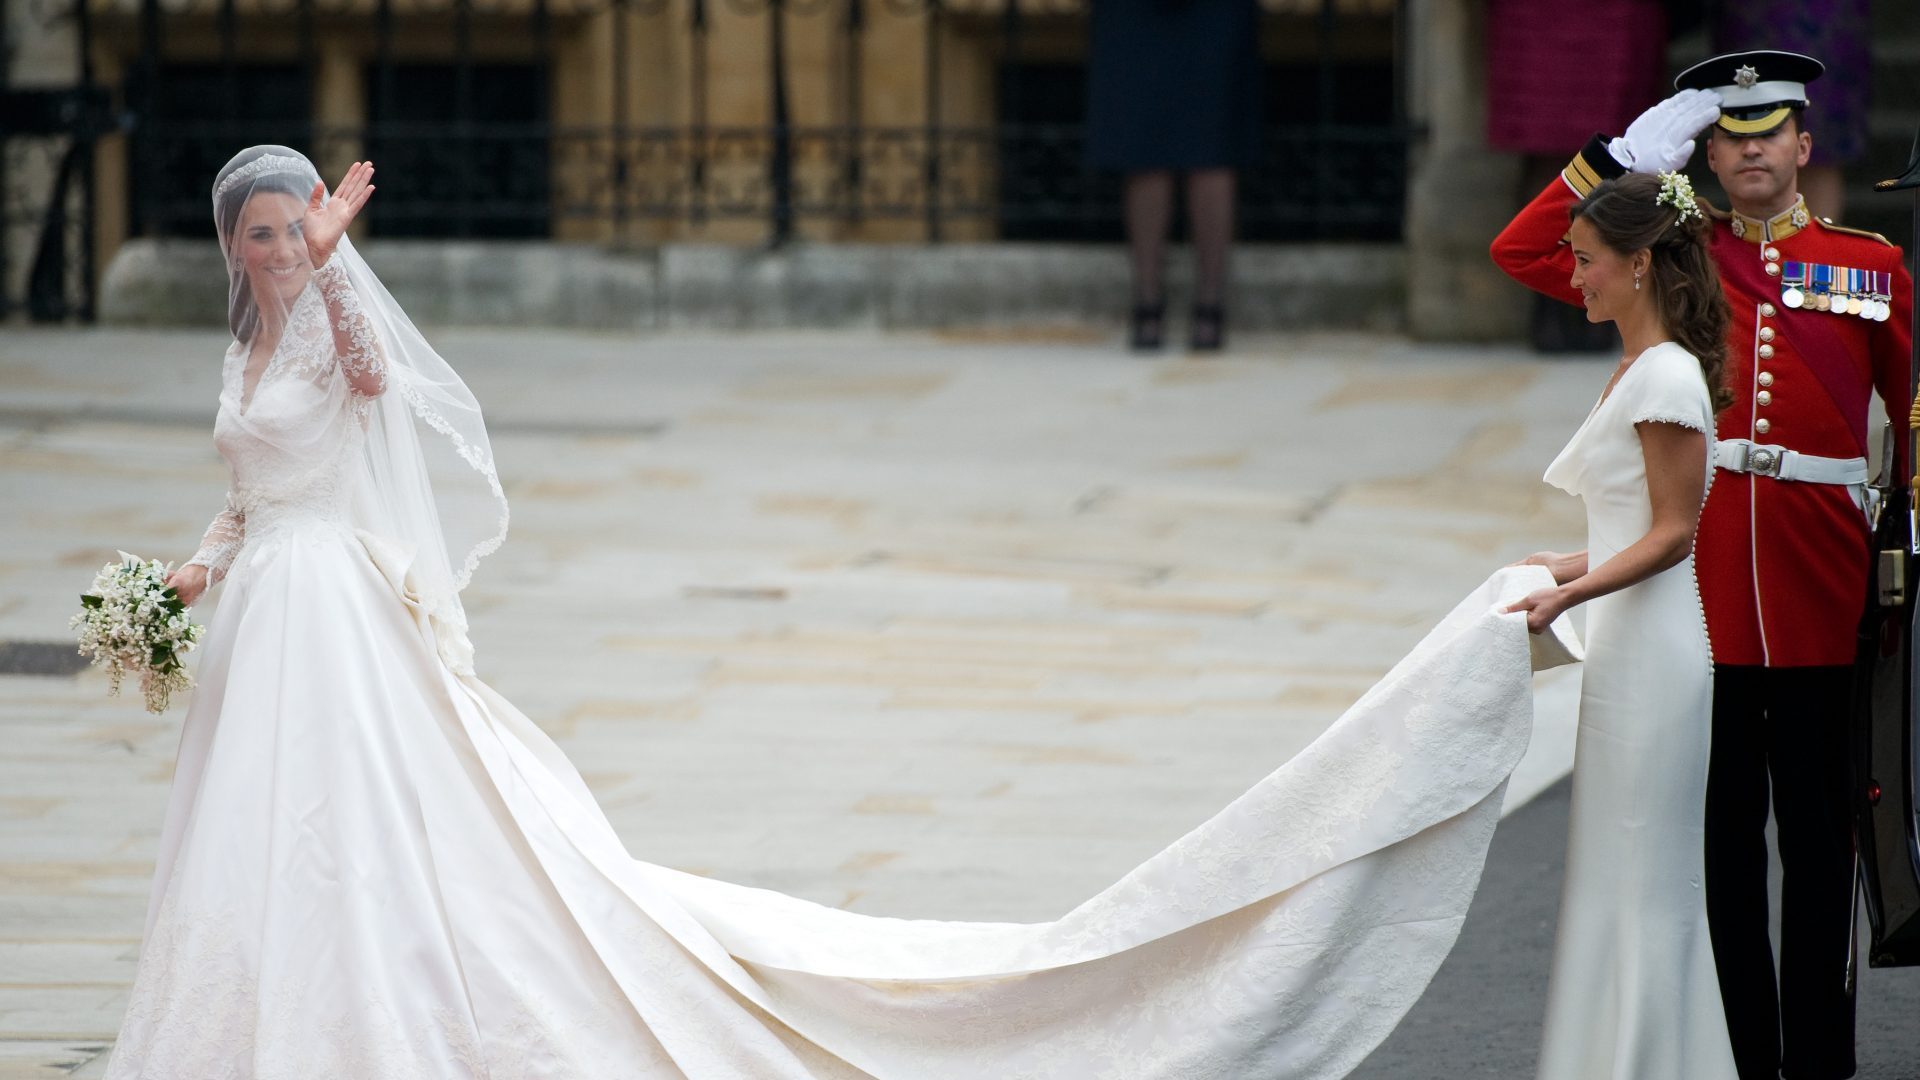 Catherine Middleton, wearing Cluny's lace, and Pippa Middleton arrive for her wedding to Prince William (Image: Getty)